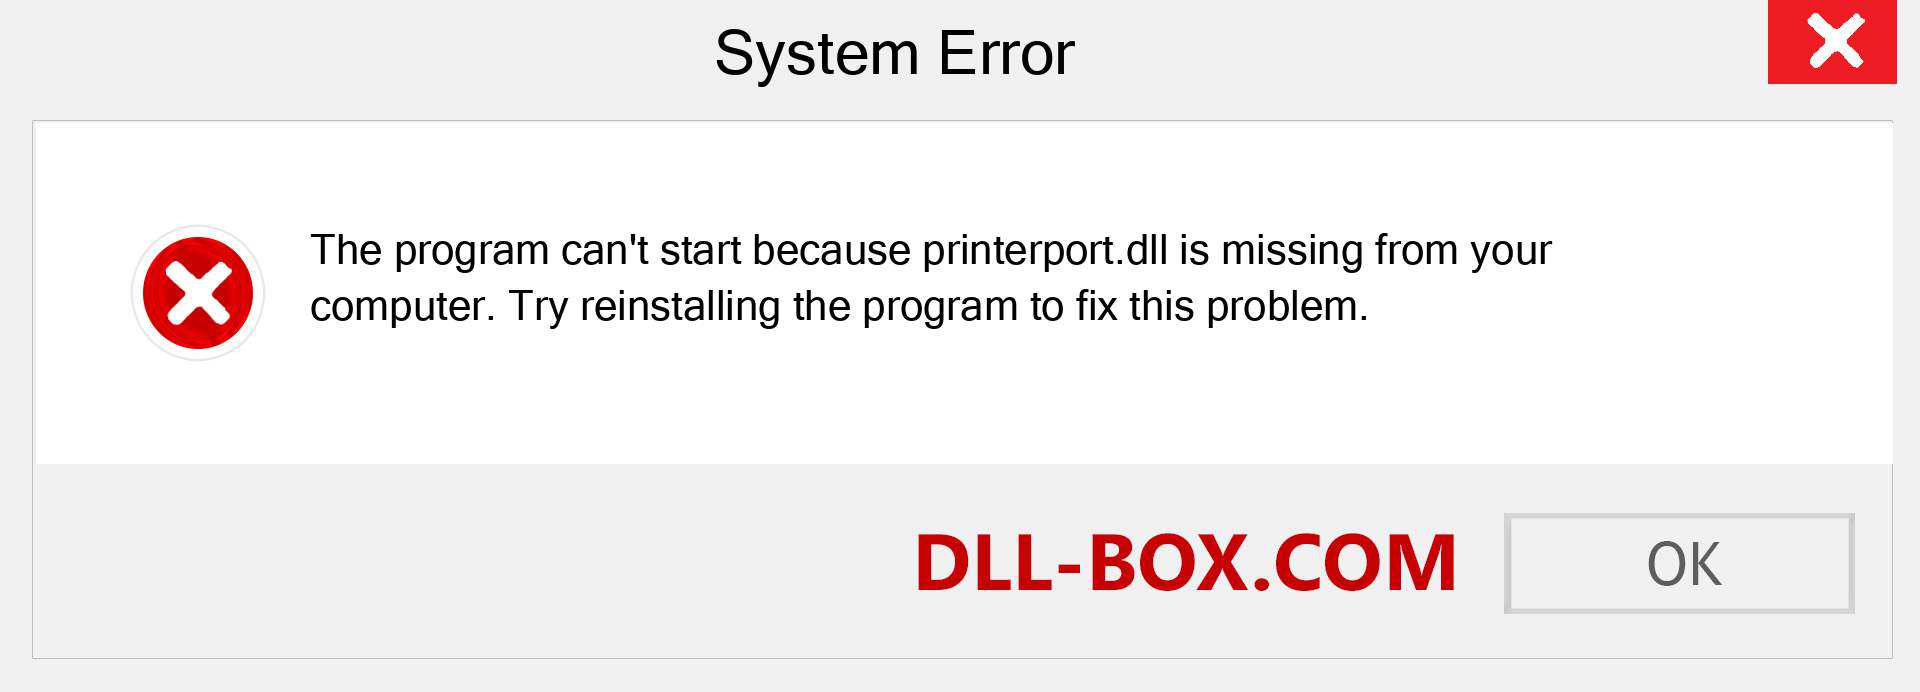  printerport.dll file is missing?. Download for Windows 7, 8, 10 - Fix  printerport dll Missing Error on Windows, photos, images